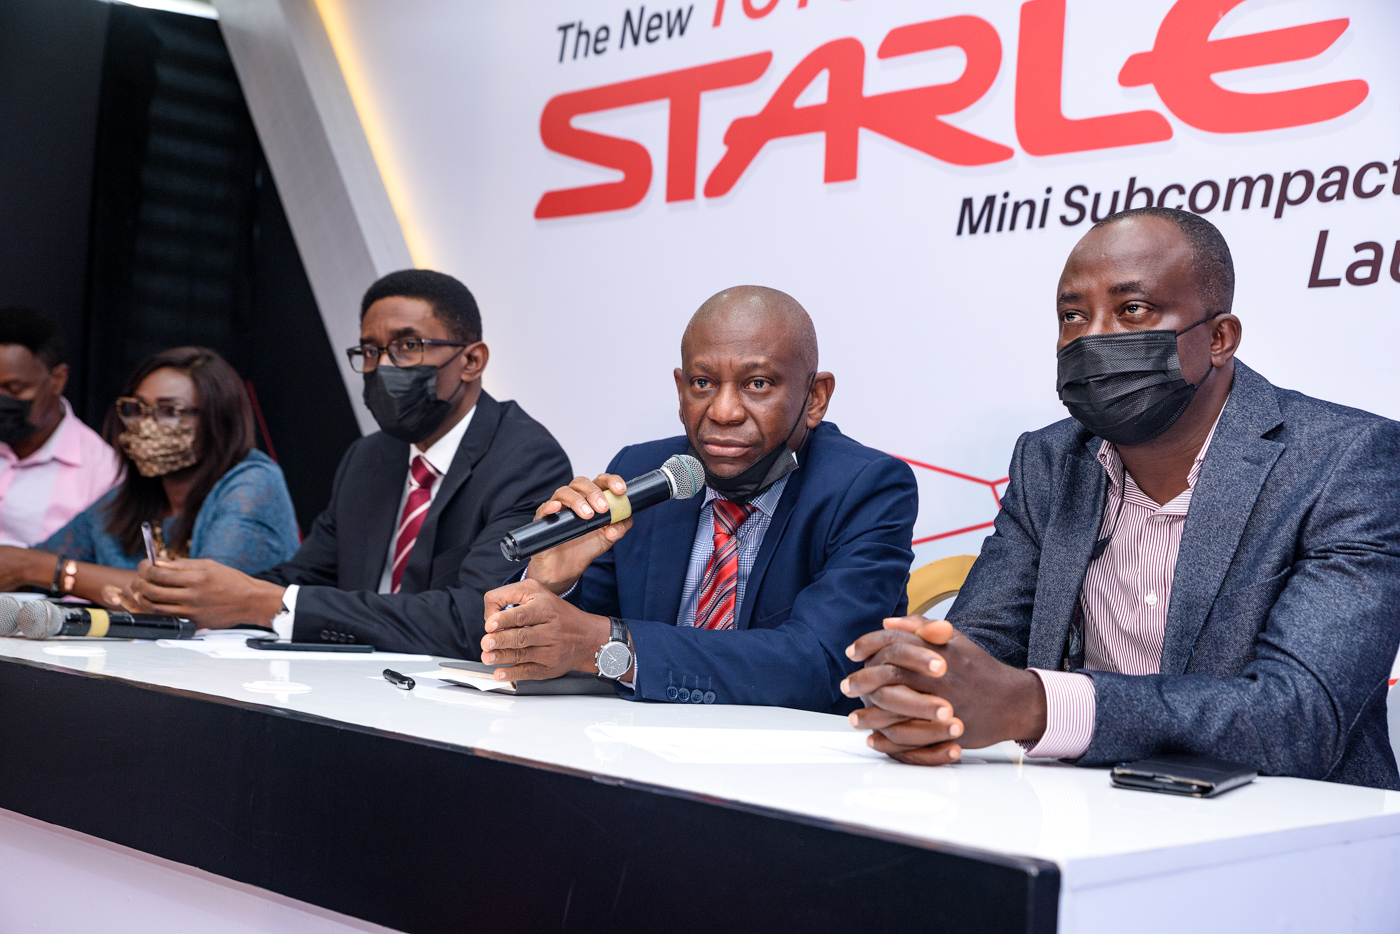 Toyota Starlet Launch Q&A Session